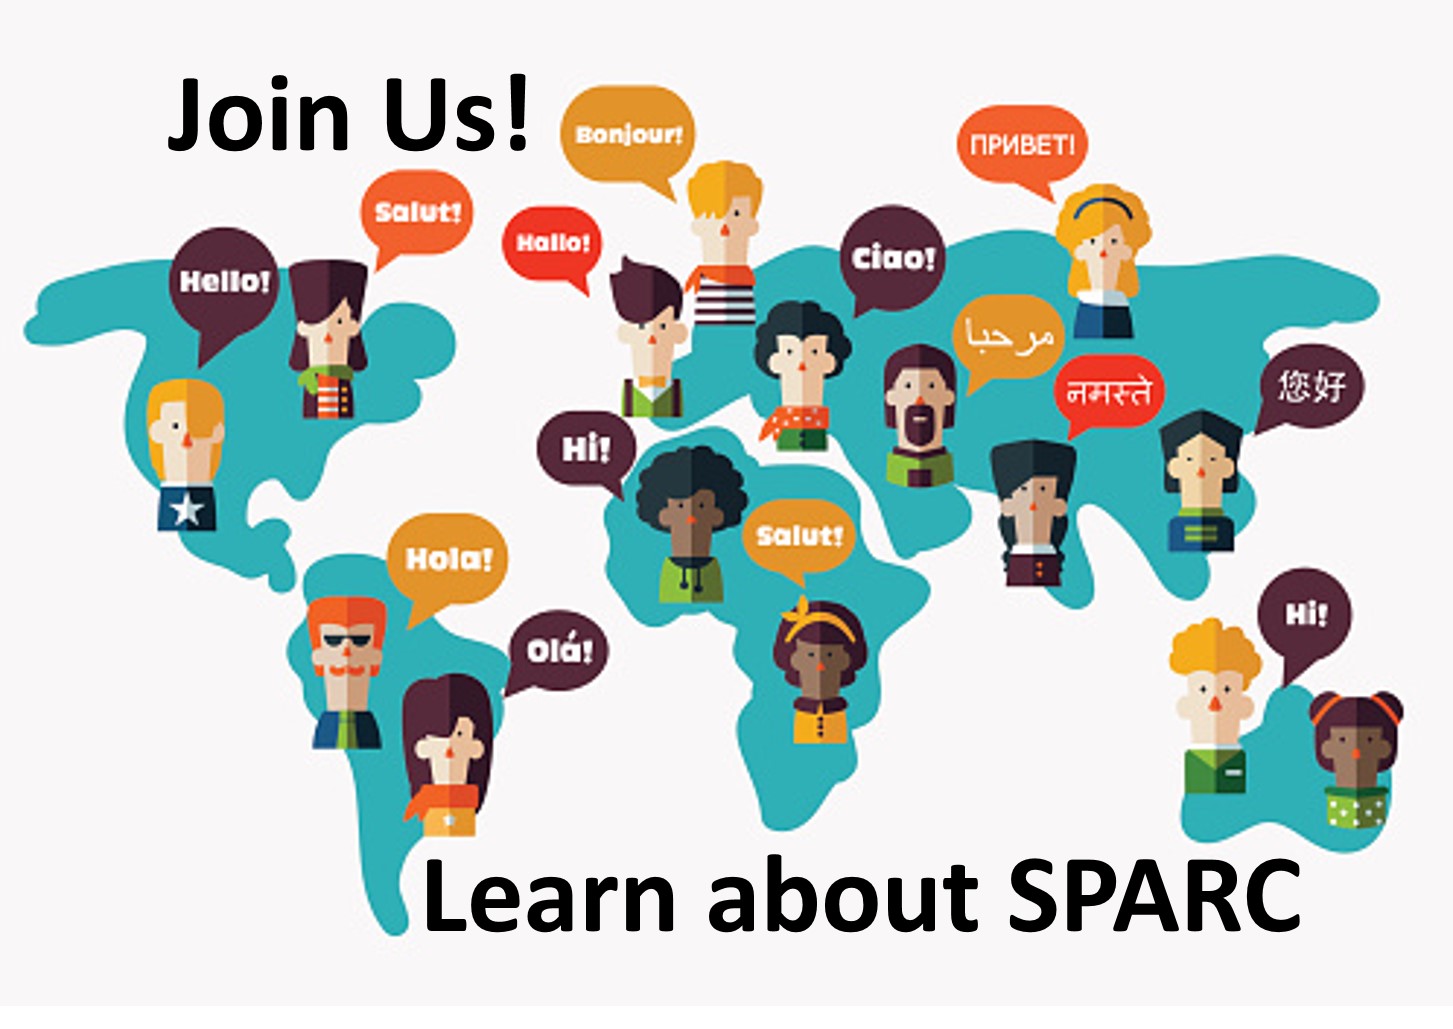 Learn about SPARC